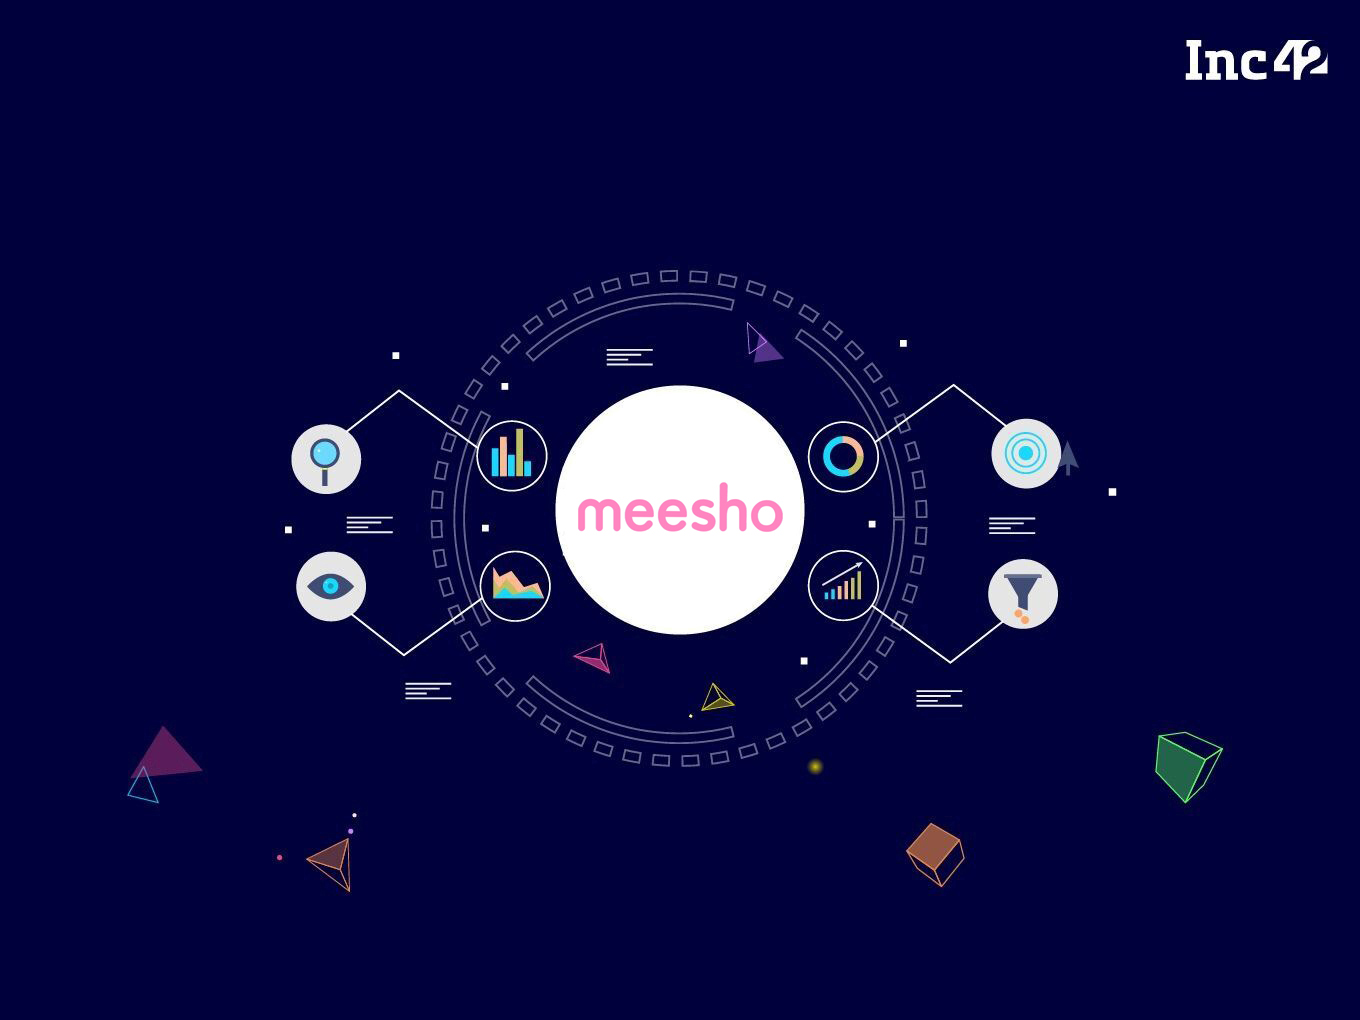 [What The Financials] Meesho’s Losses Surge 3X In FY20 As Social Commerce Competition Heats Up